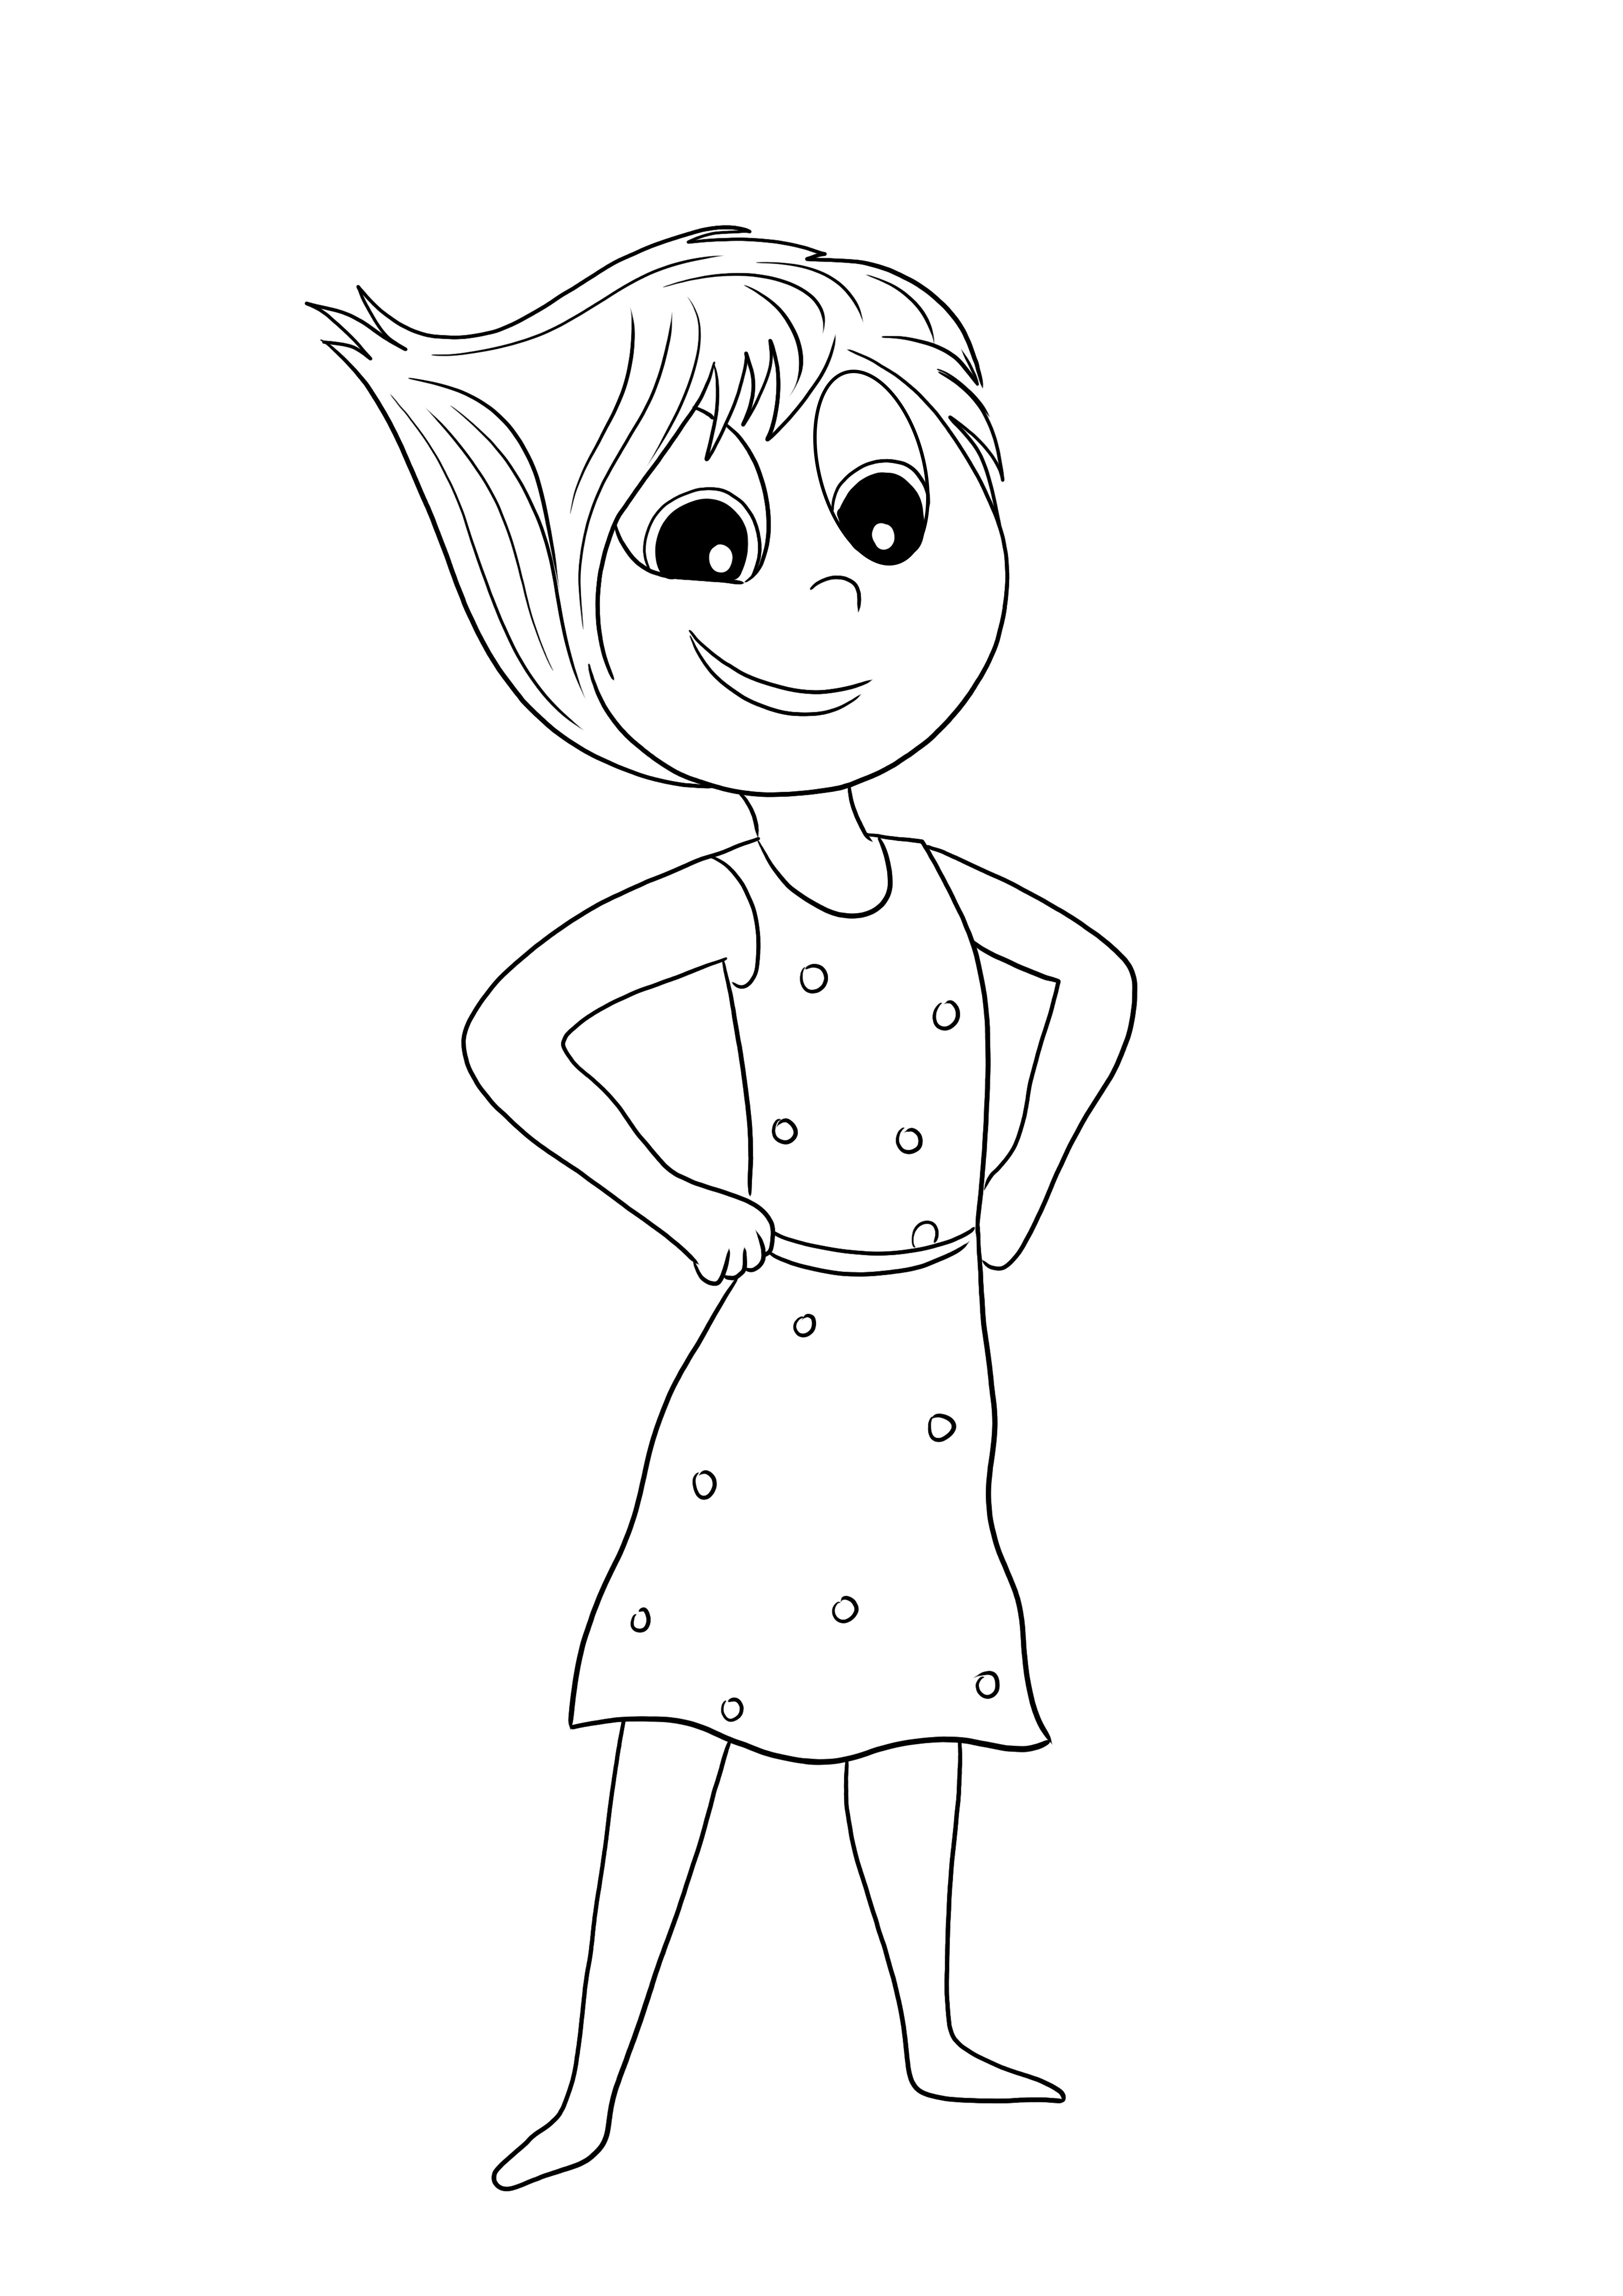 Joy from Inside Out-free to download or print and easy to color